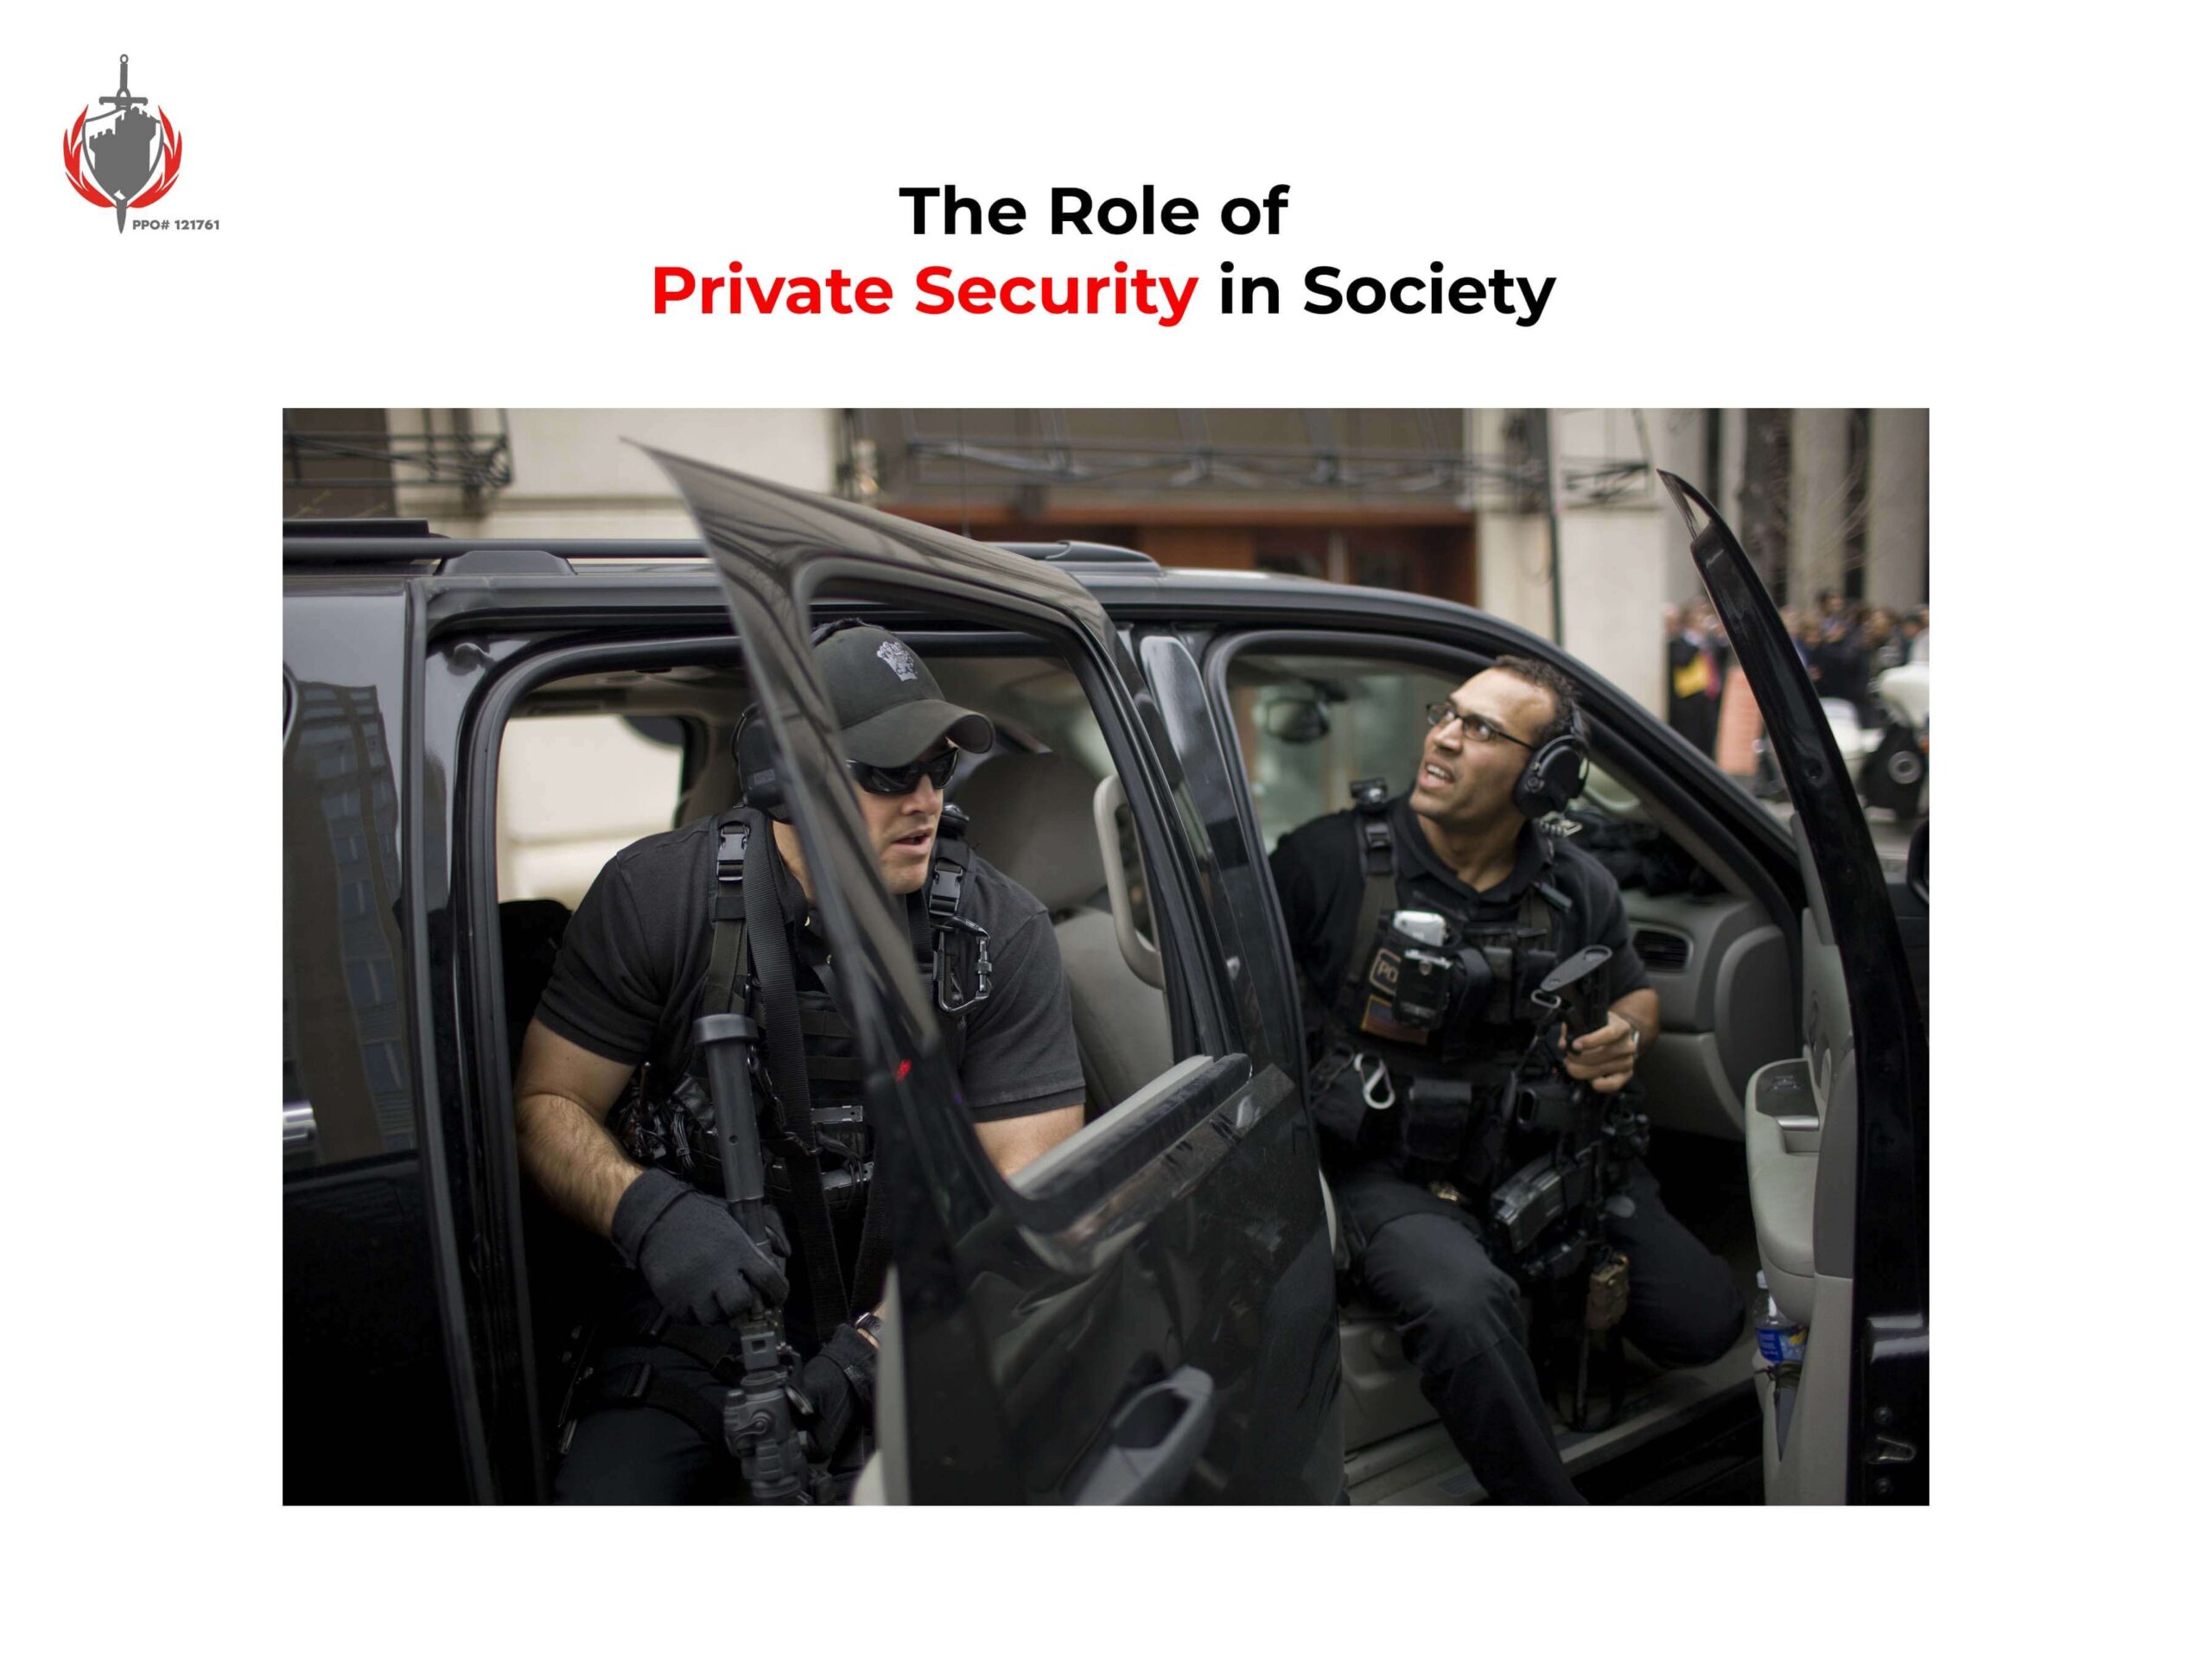 The Role of Private Security in Society